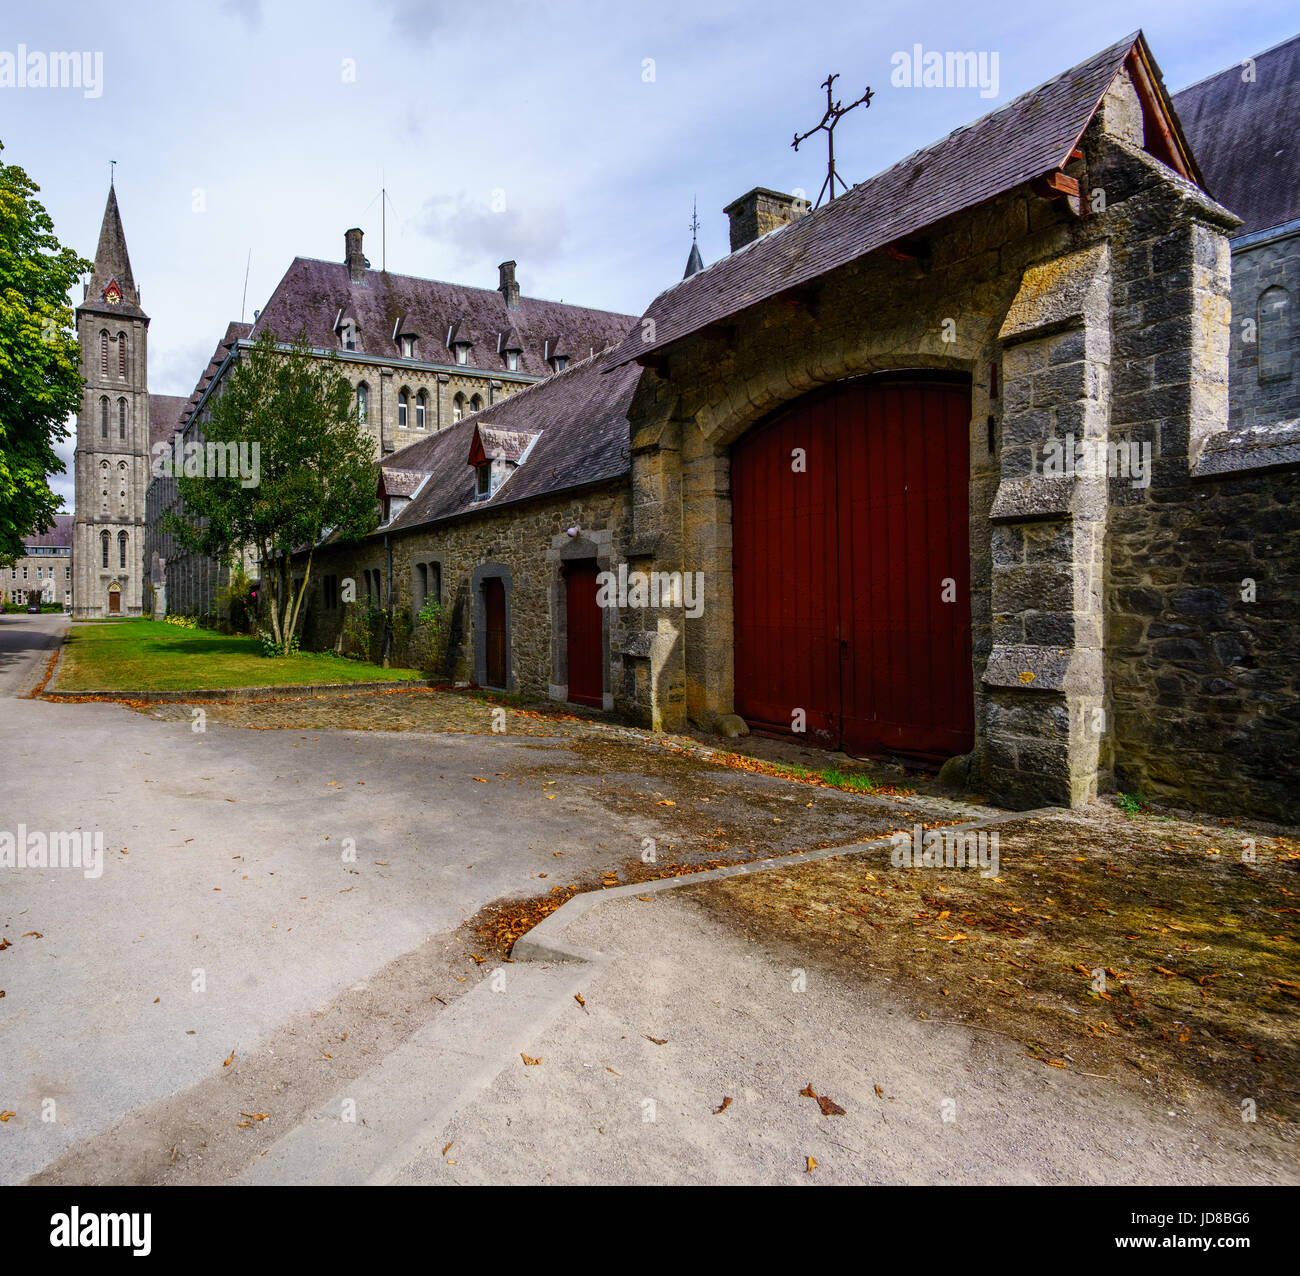 Closed gate and entrance driveway with grand building in distance, Belgium. belgium europe Stock Photo